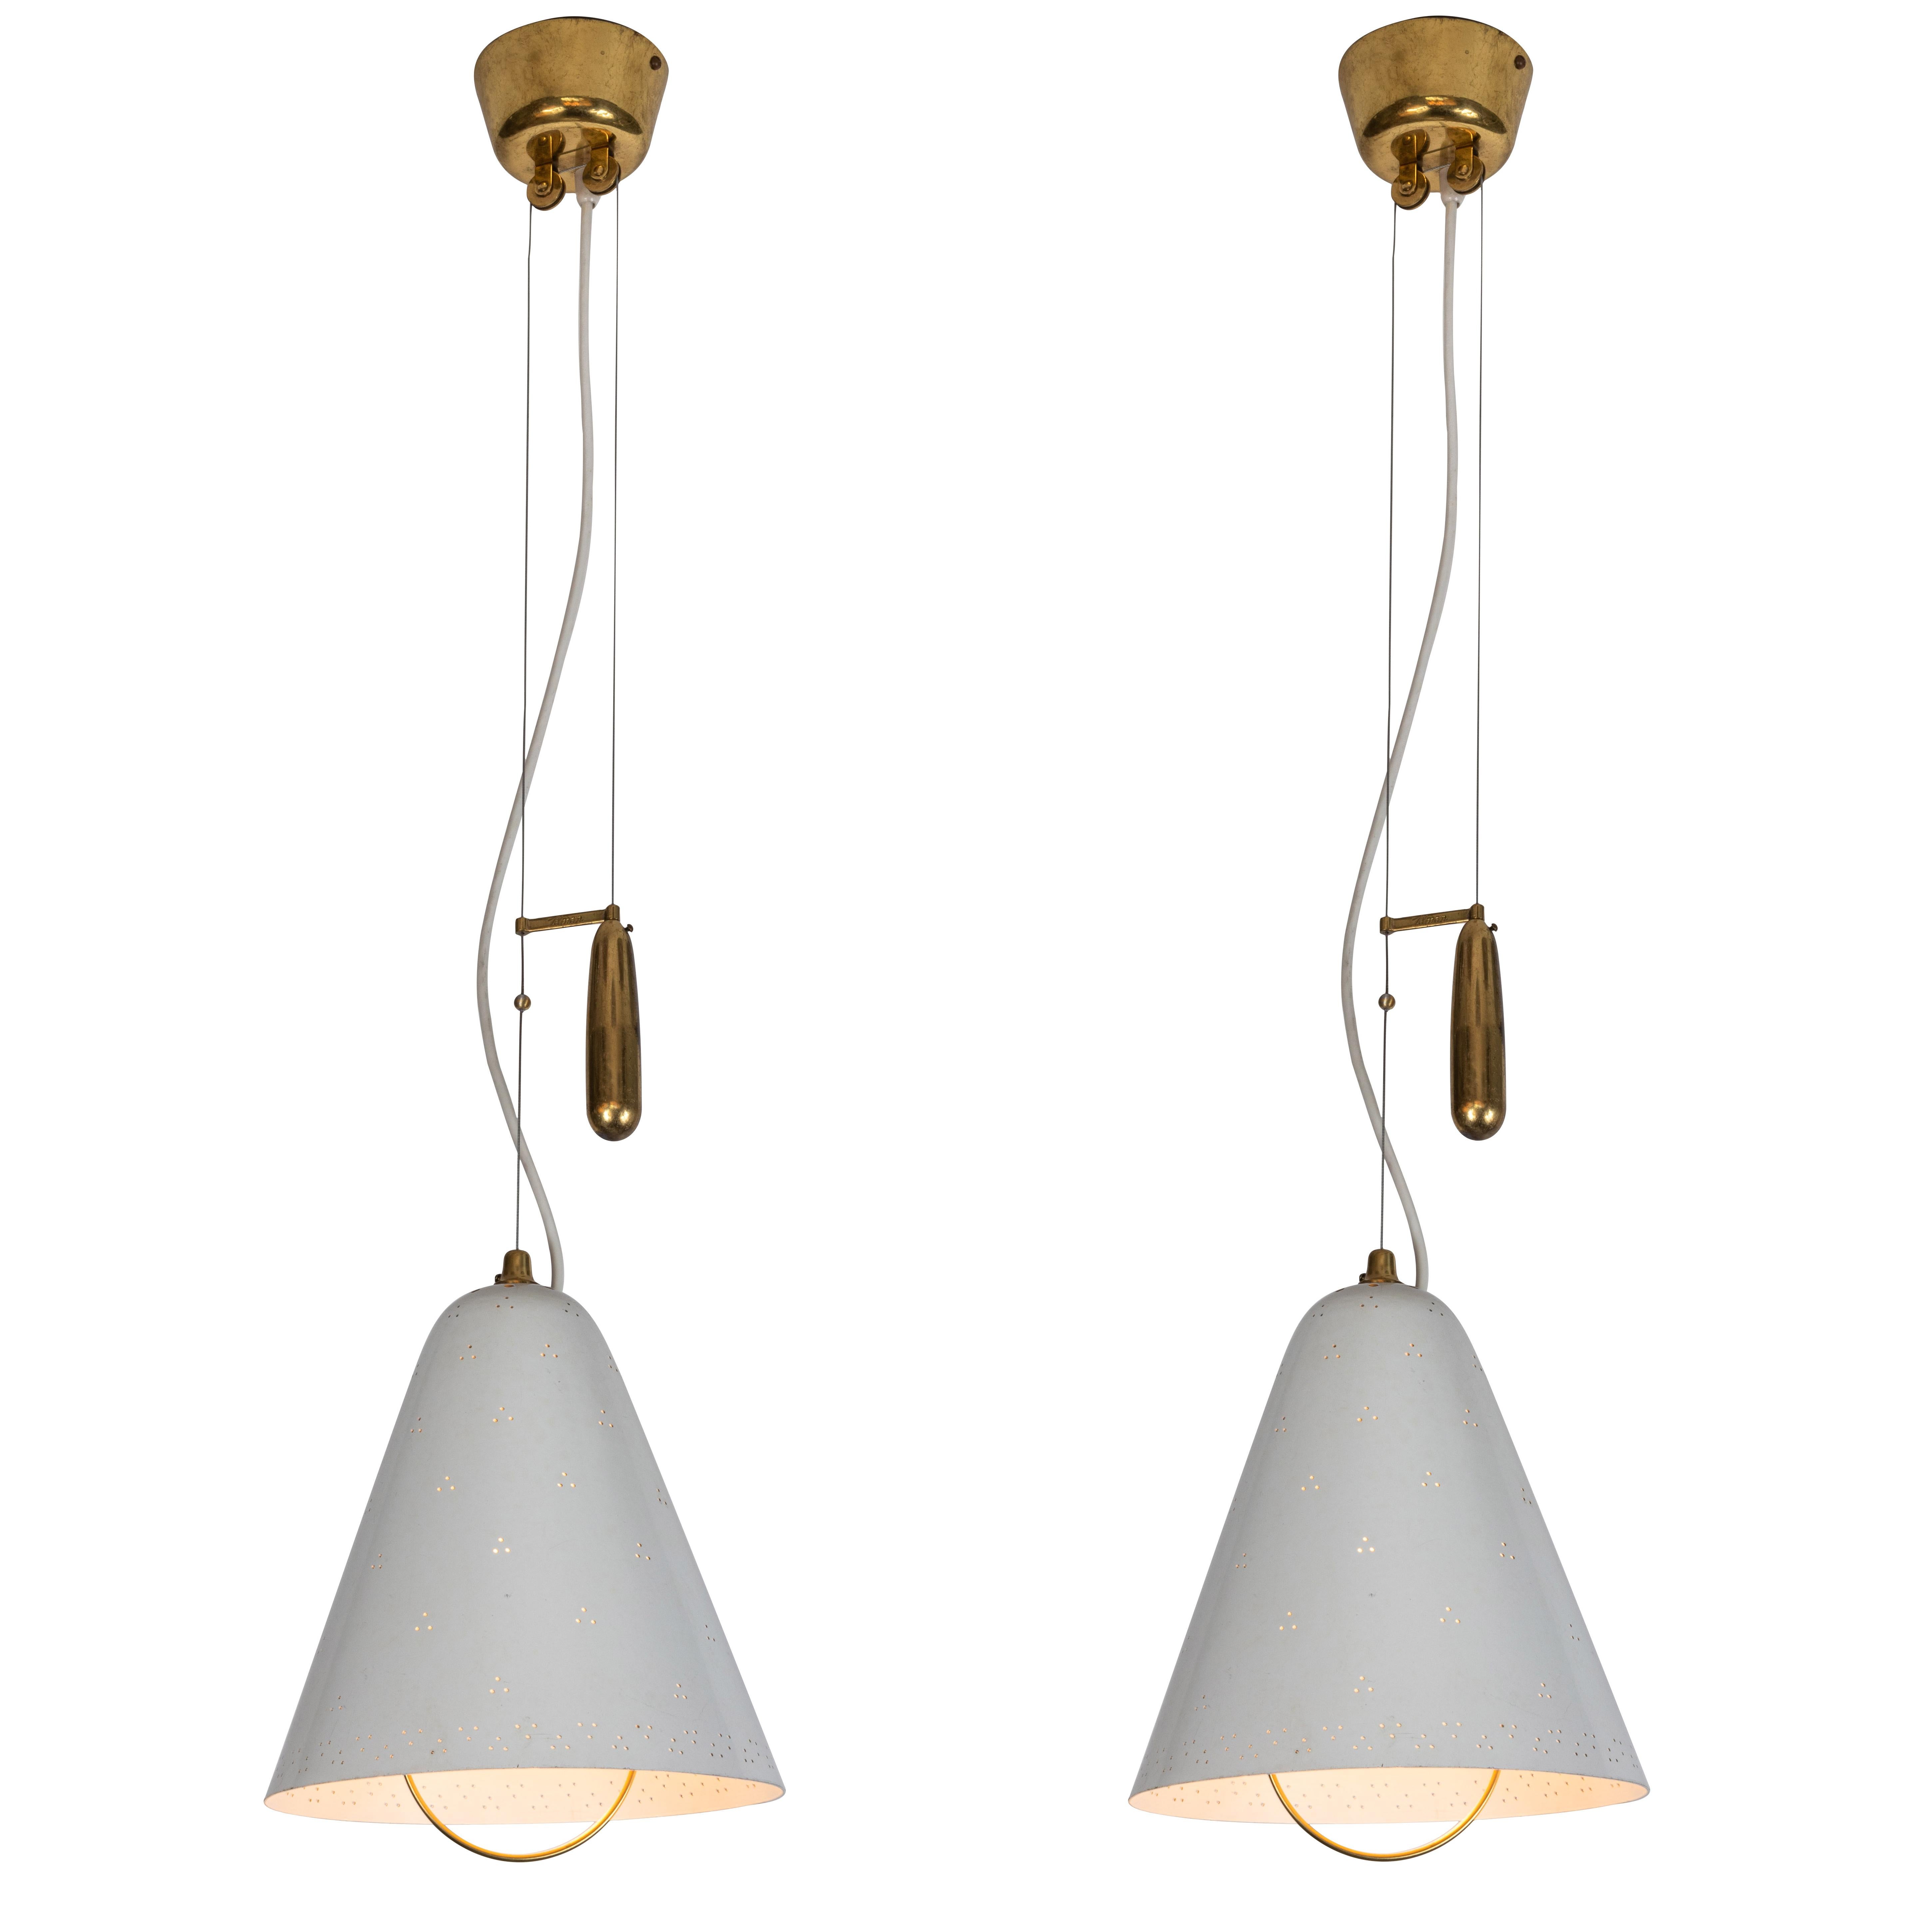 1940s Paavo Tynell 'A1942' counterweight pendants for Idman Oy. This rare and exceptional pendant is executed in white painted perforated metal and brass, and can be raised and lowered using its ingenious counterweight and pulley system.